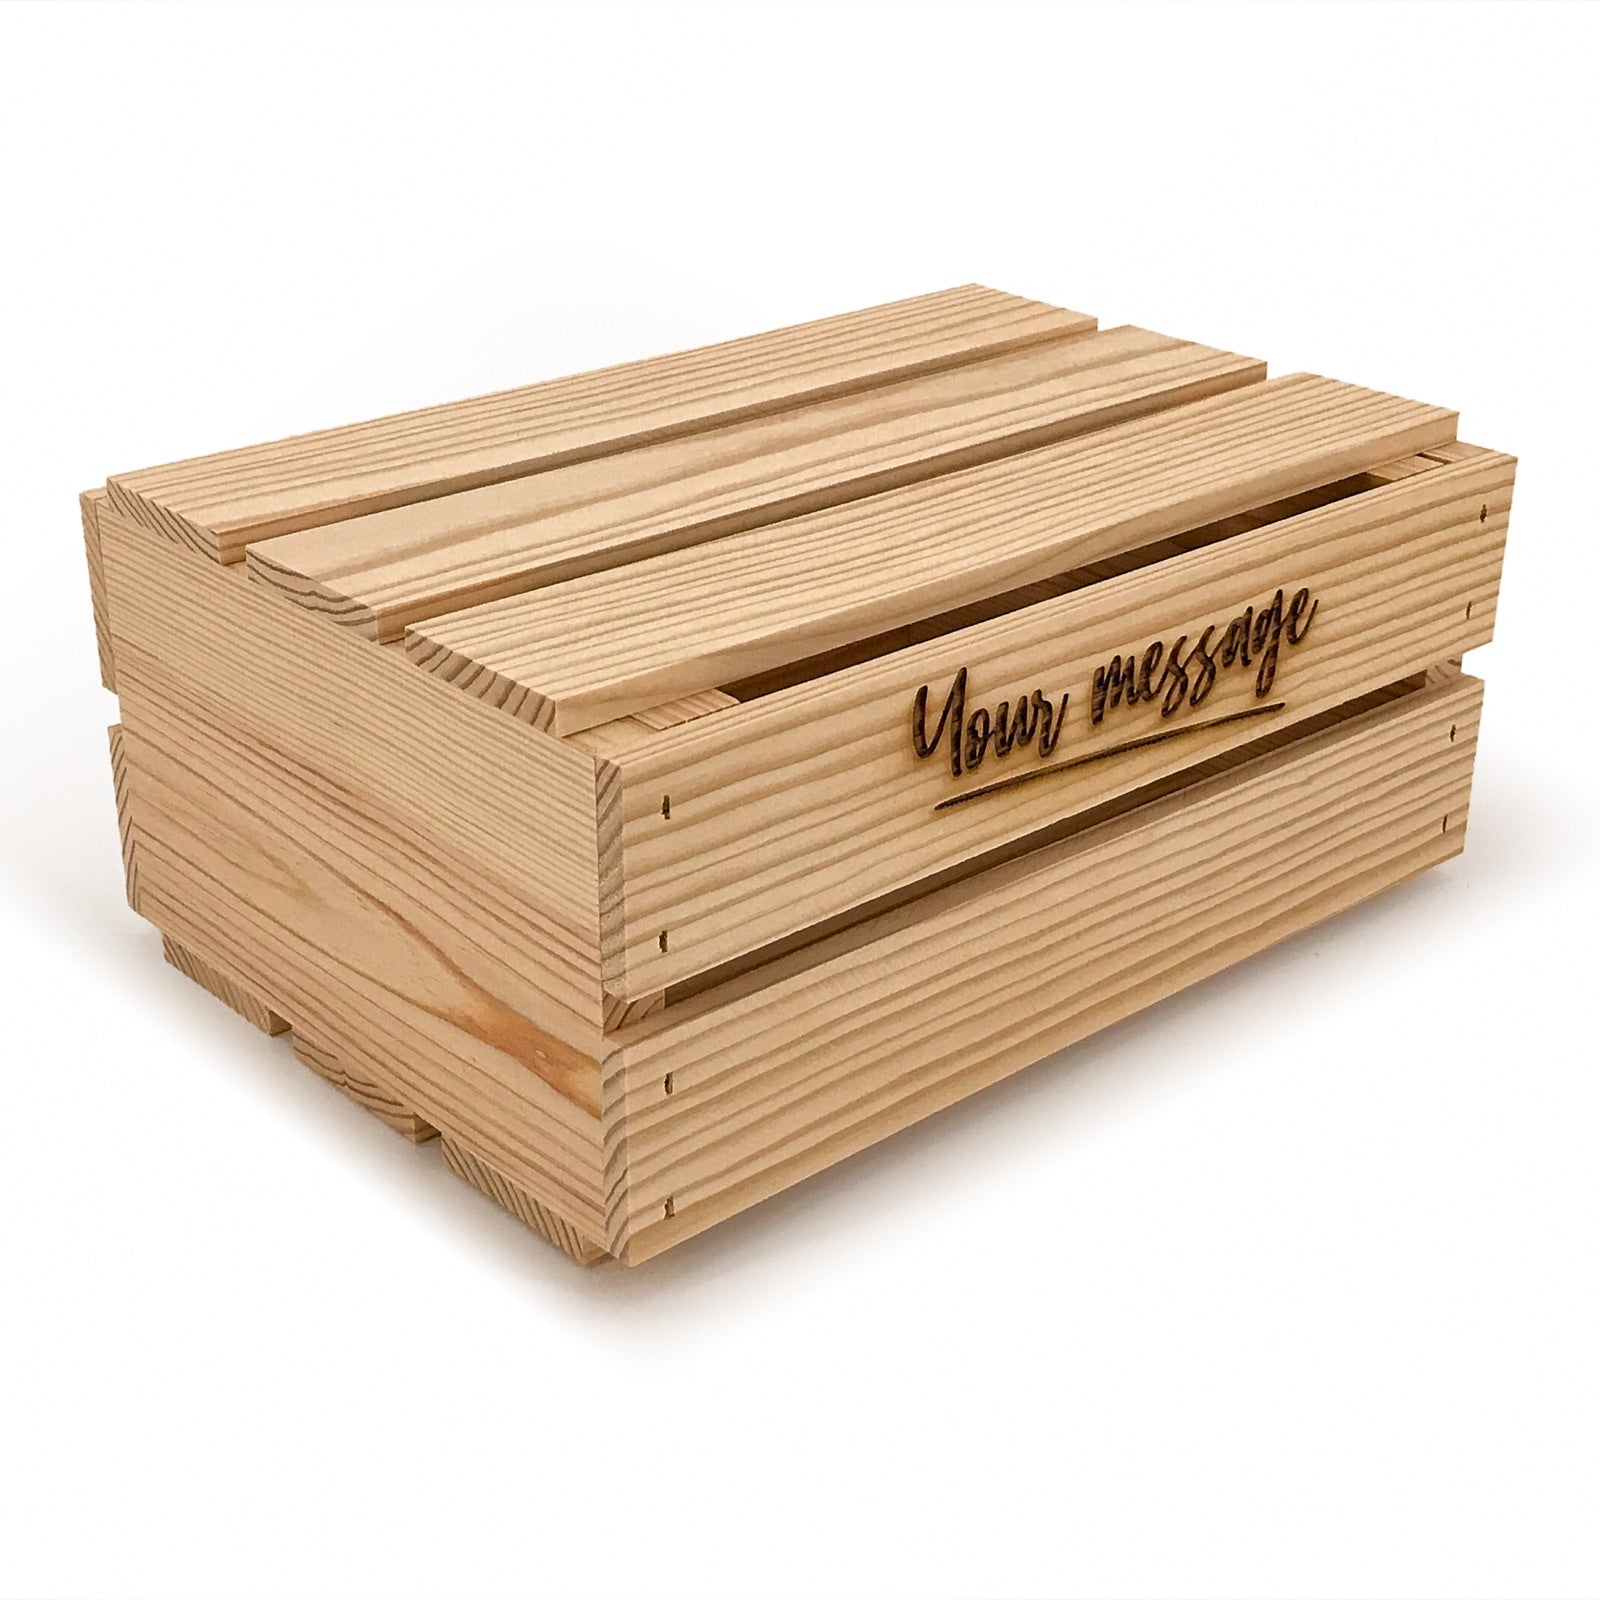 Small wooden crate with lid and custom message 12x9x5.25